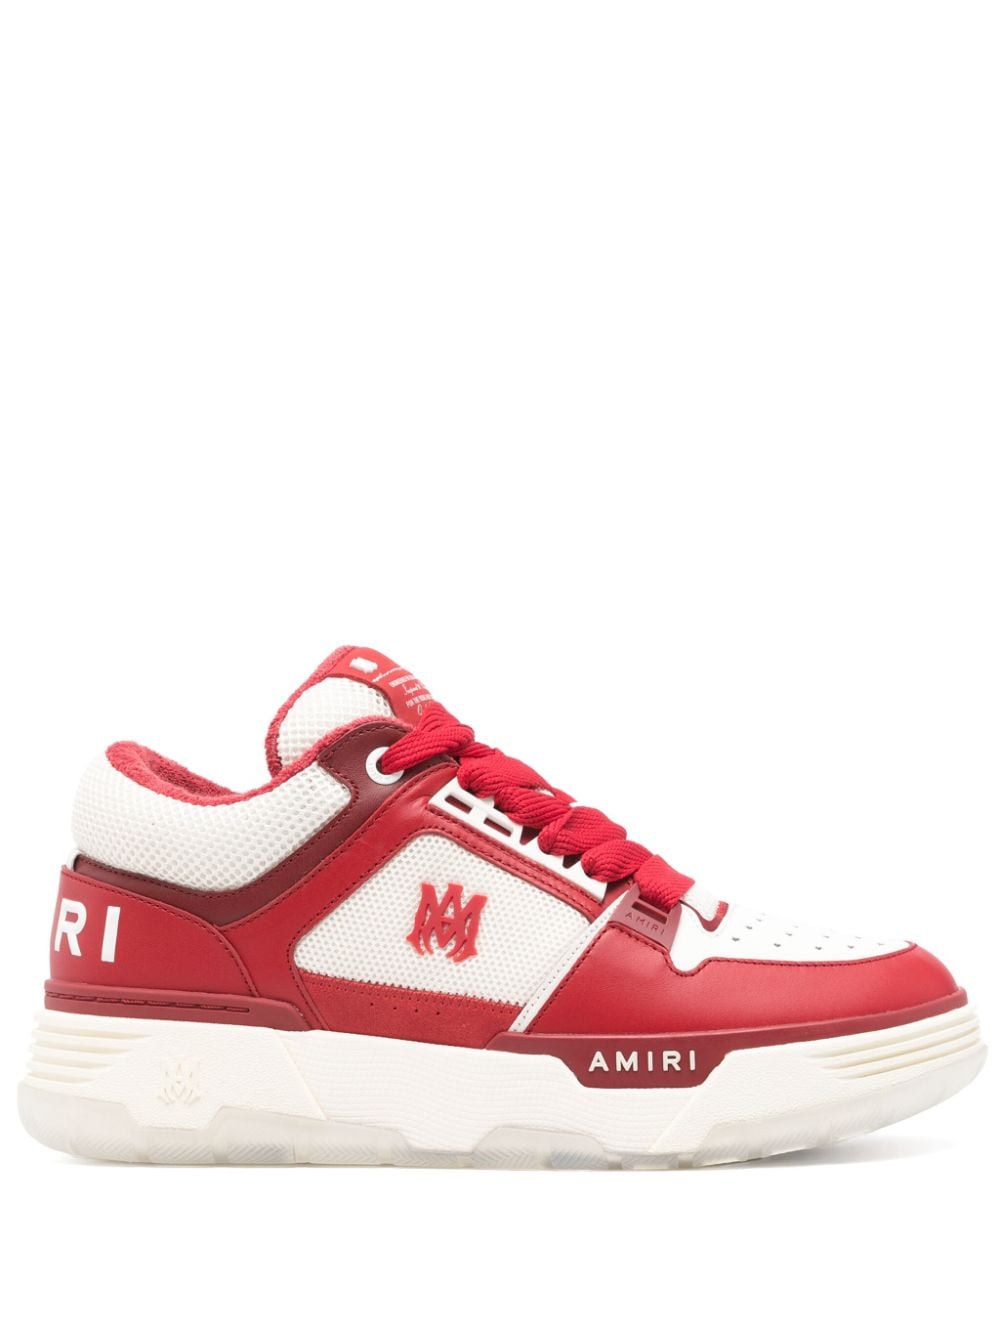 AMIRI MA-1 panelled sneakers - Red